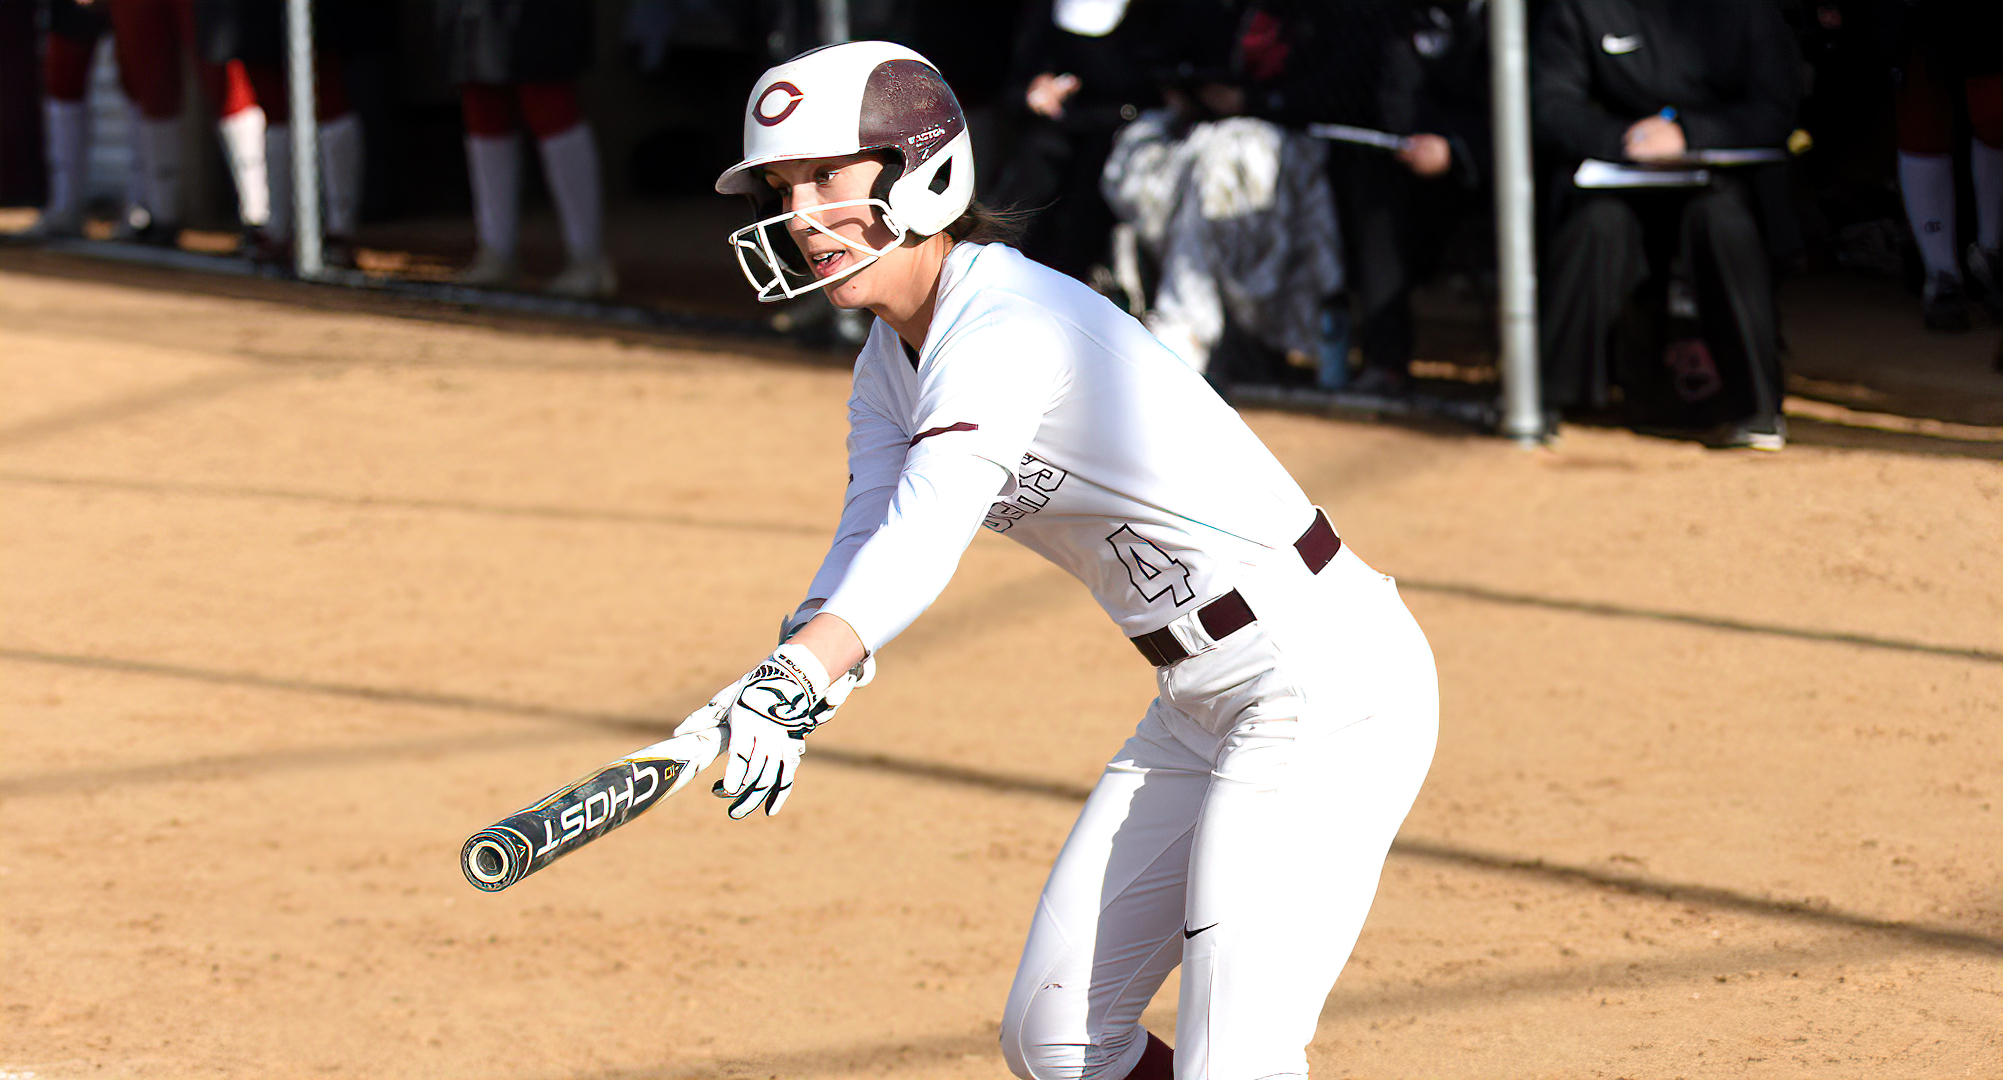 Senior Rosie Unglaub was 2-for-2 in the Cobbers' first game on Sunday against Allegheny and scored the team's lone run.